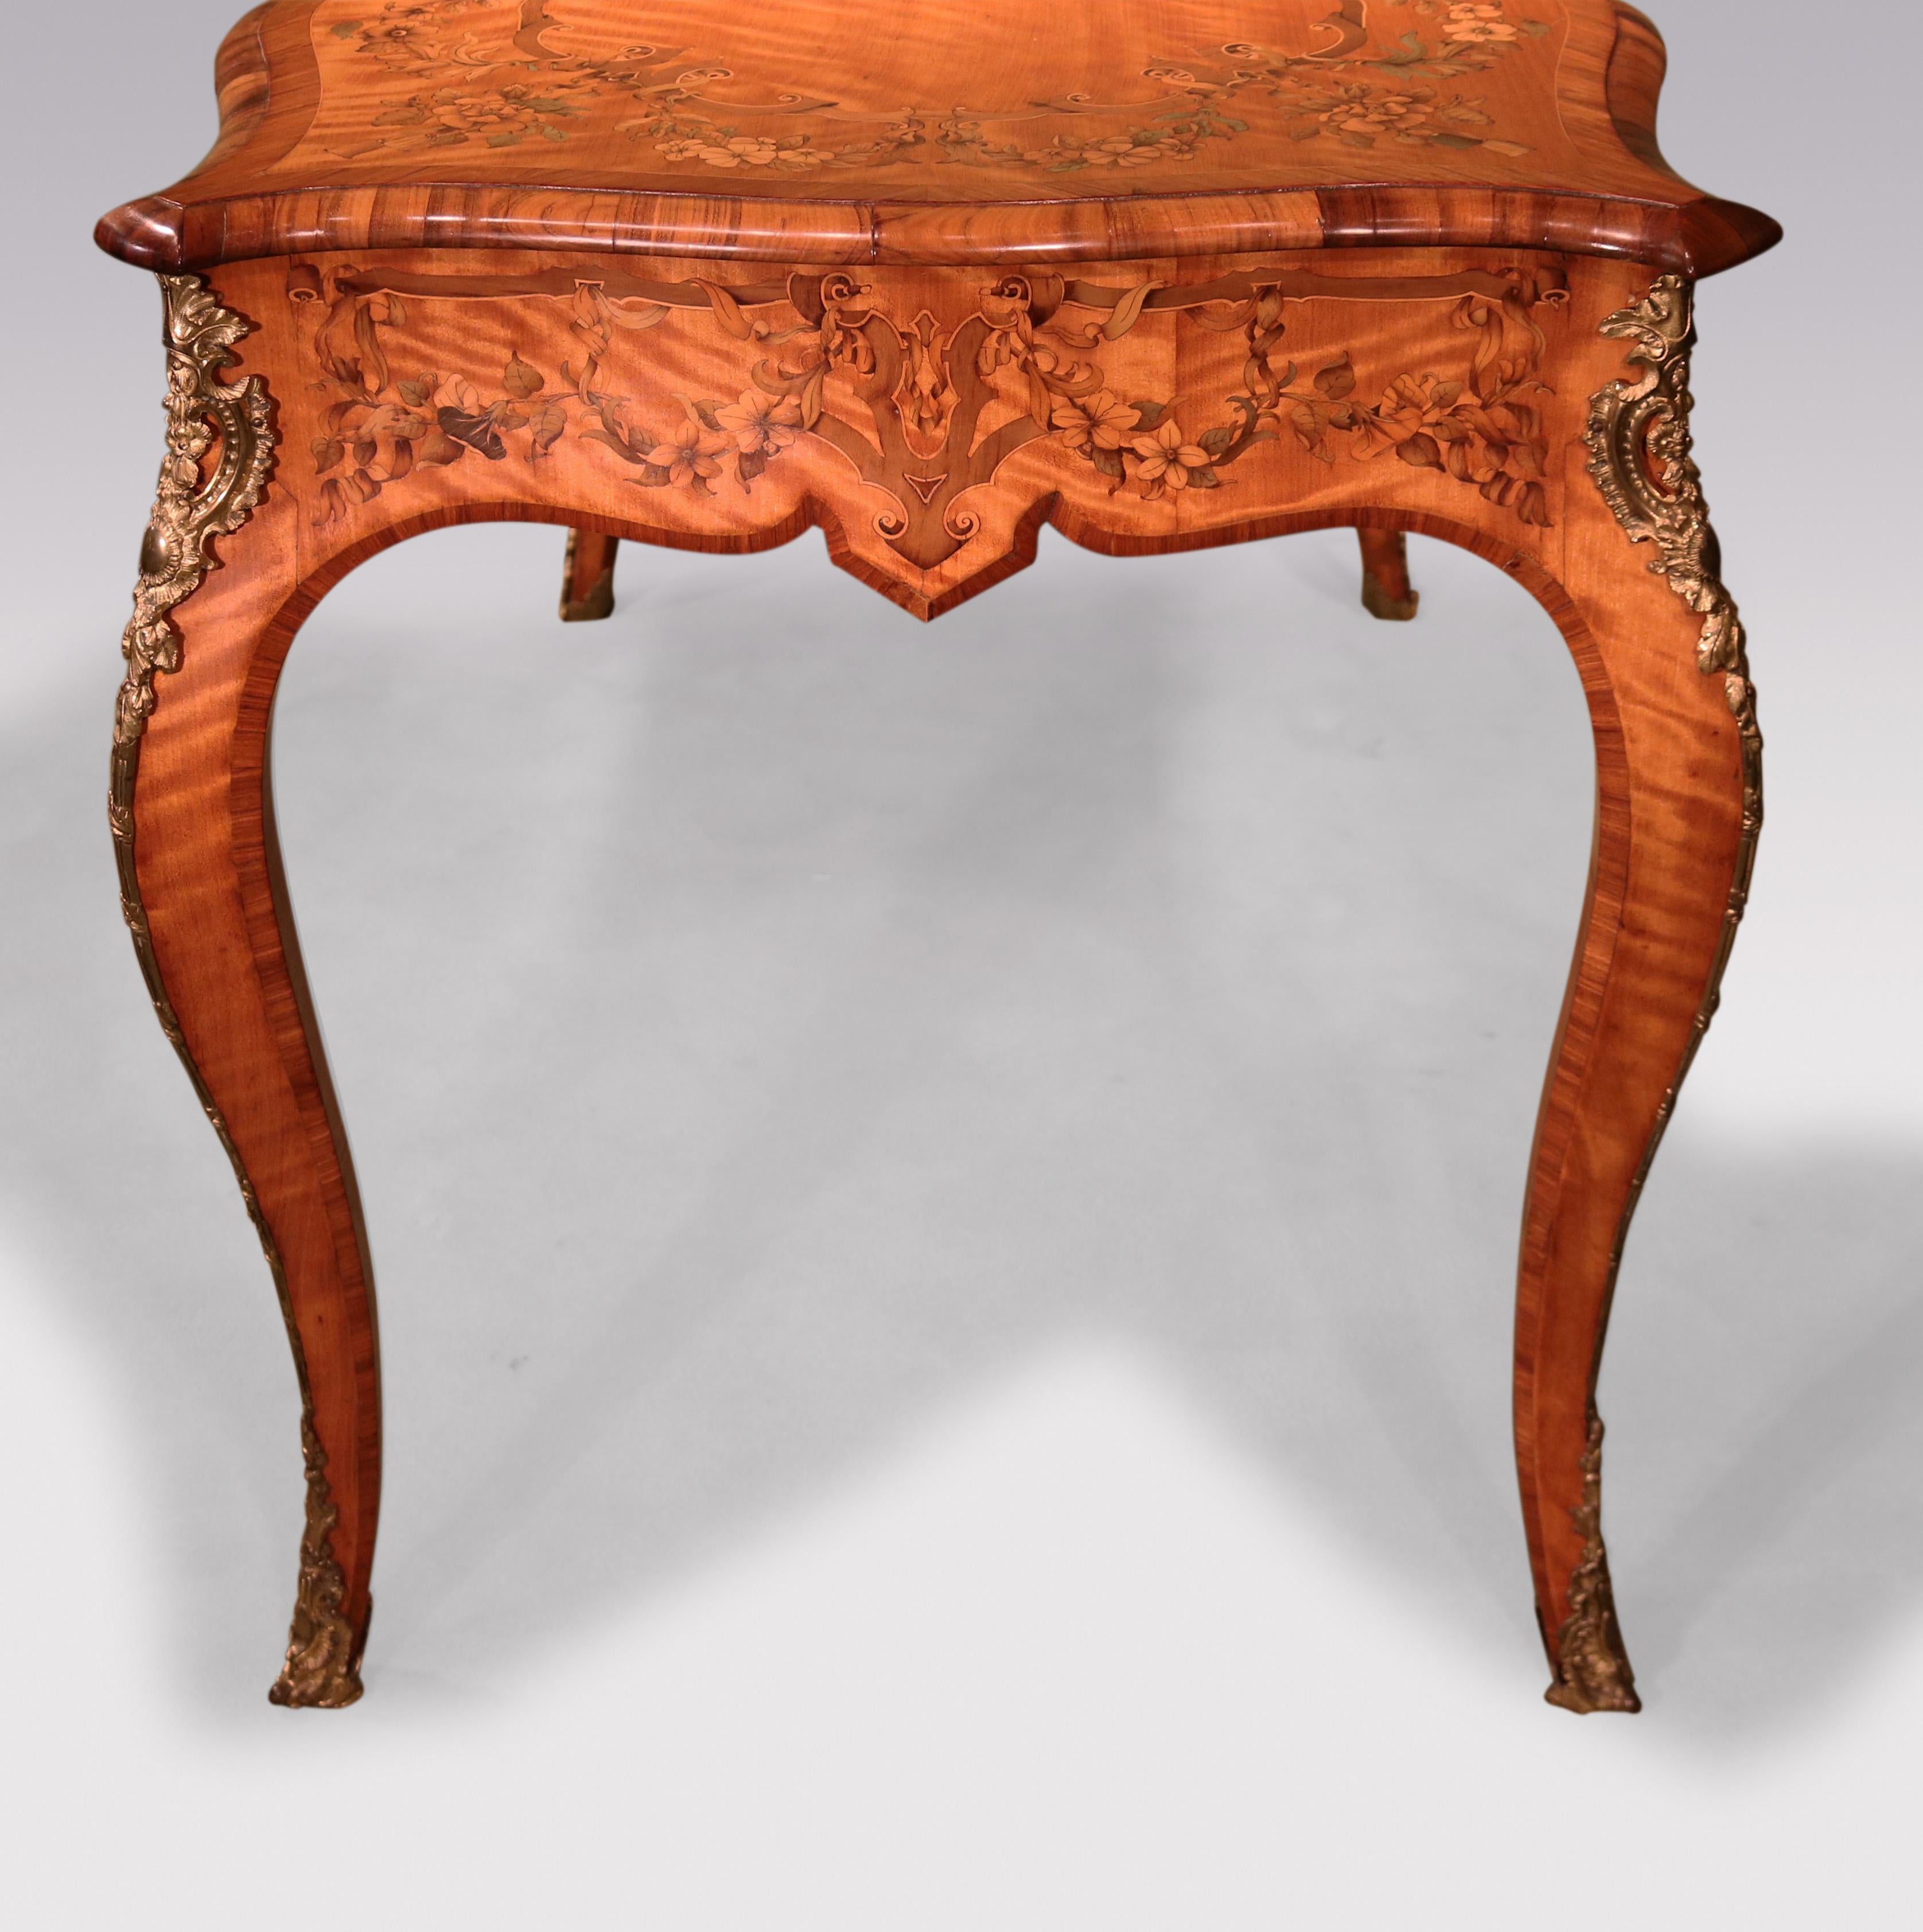 An unusual fine quality mid-19th Century serpentine-shaped Writing Table, having coromandel end-grain moulded edge top and tulipwood crossbanding throughout.  The Table, profusely inlaid with strapwork & flower garlands, supported on cabriole legs